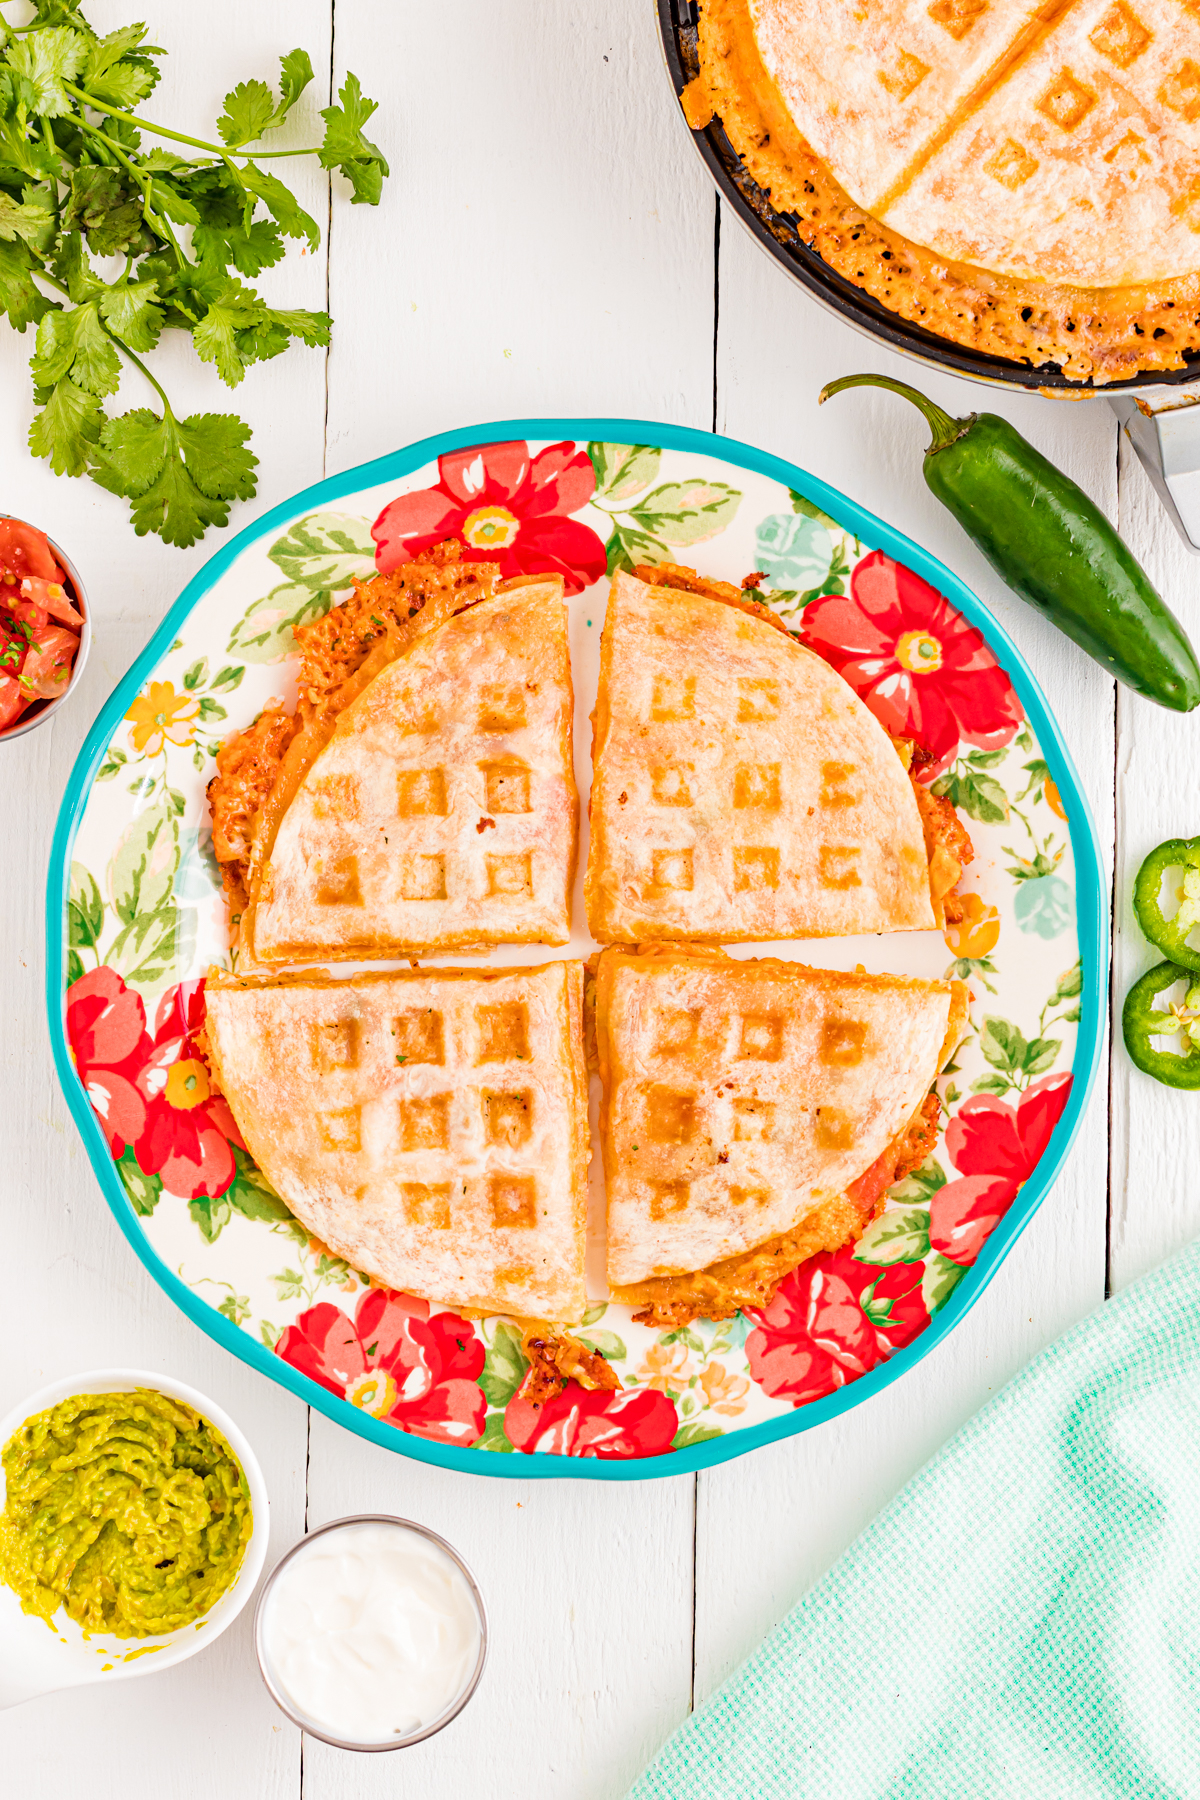 A cooked quesadilla in a waffle maker on a plate.